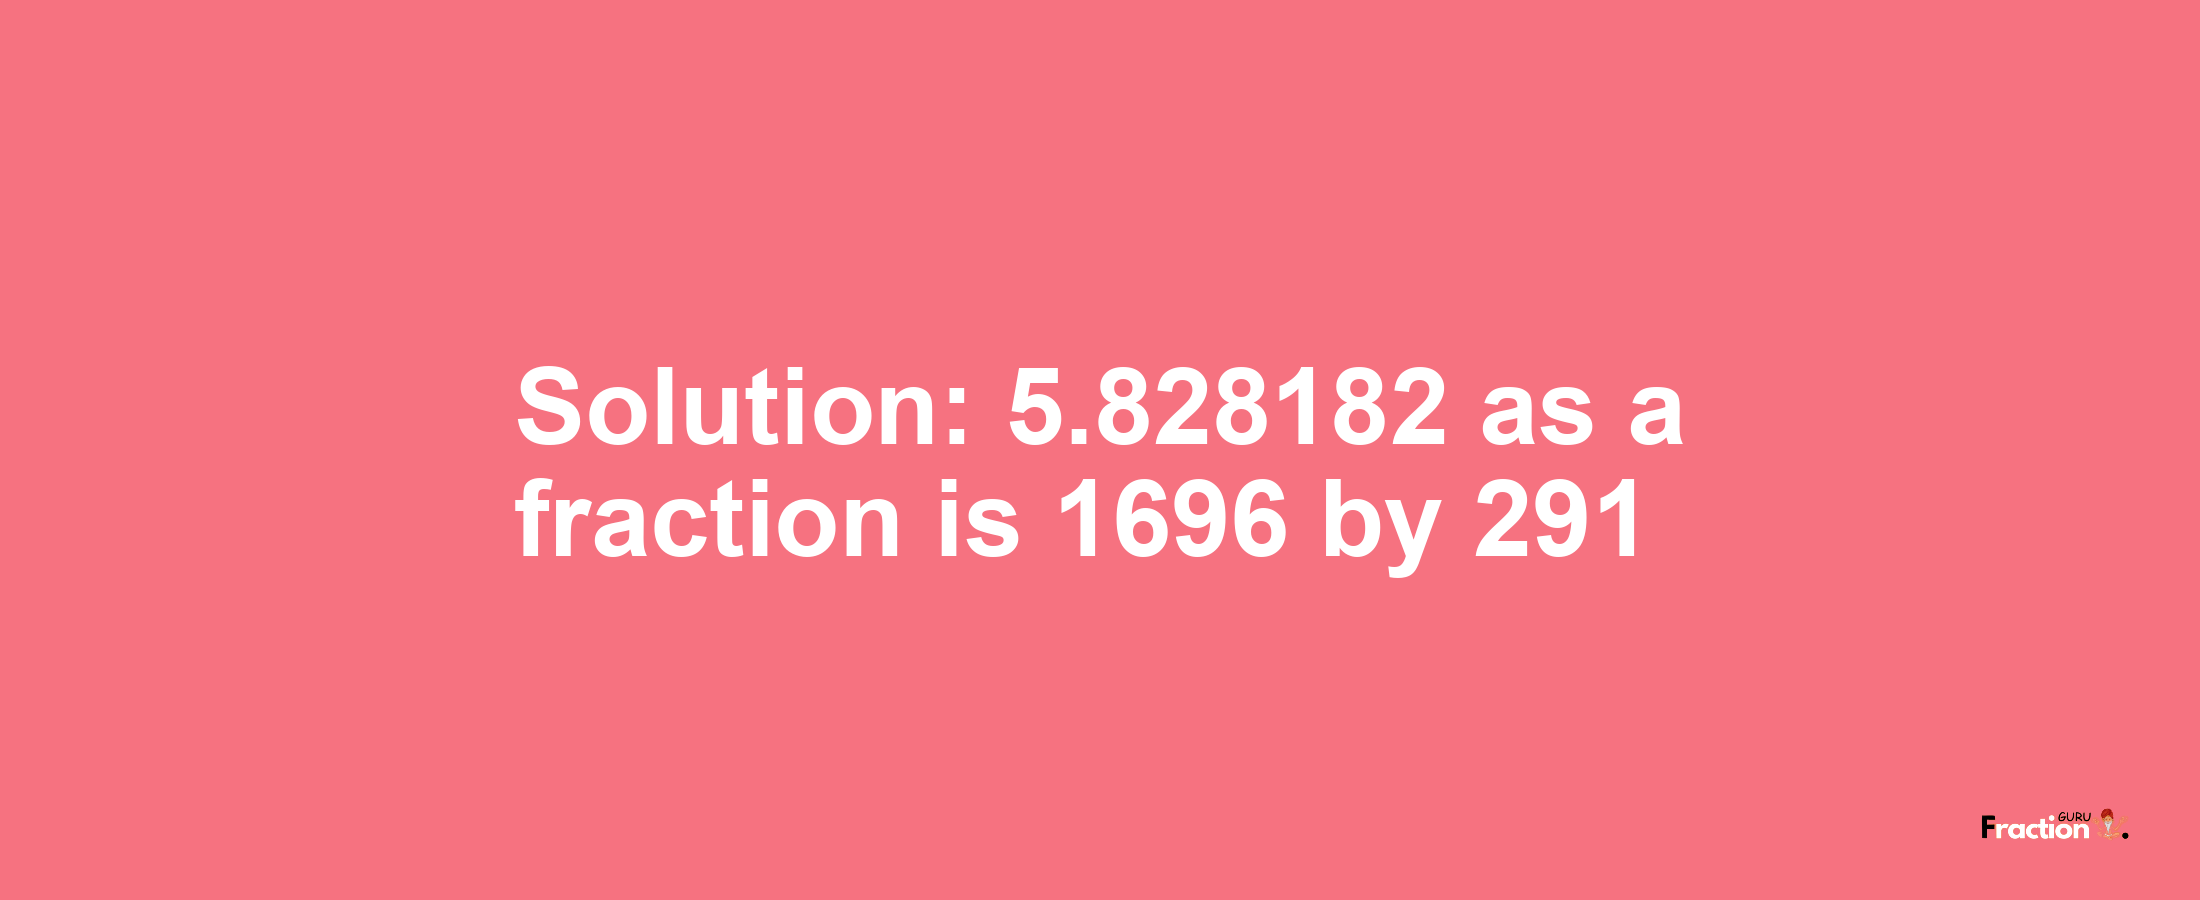 Solution:5.828182 as a fraction is 1696/291